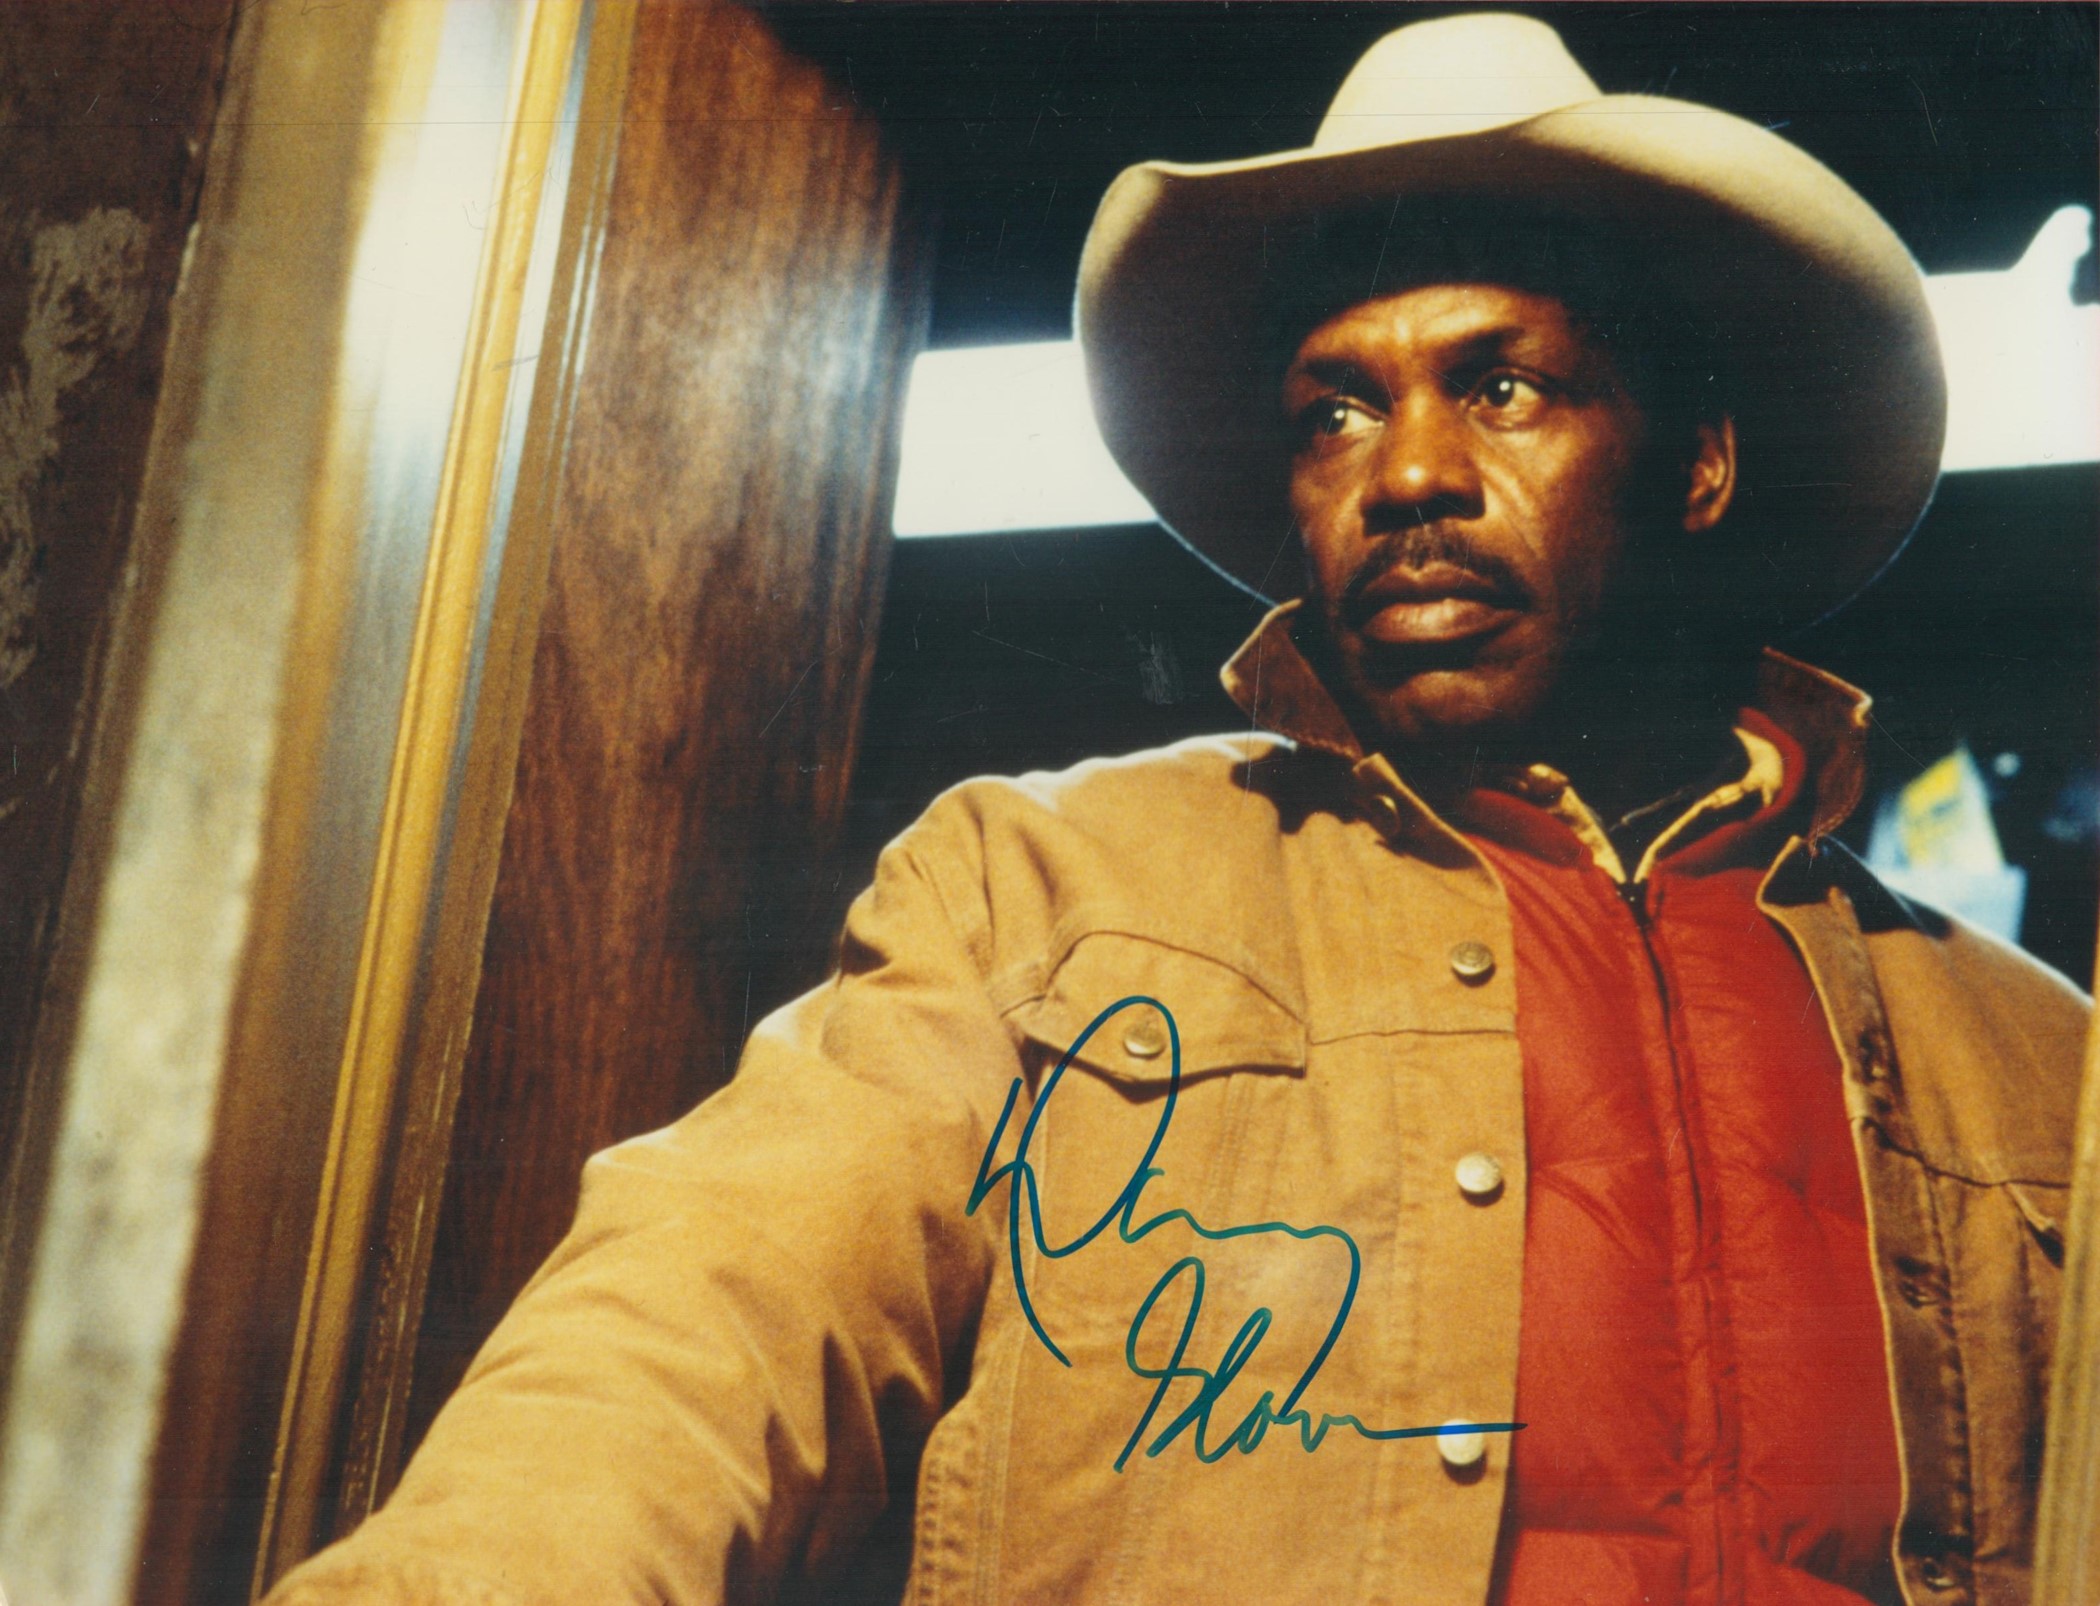 Danny Glover signed 10x8 inch colour photo. Daniel Lebern Glover, born July 22, 1946, is an